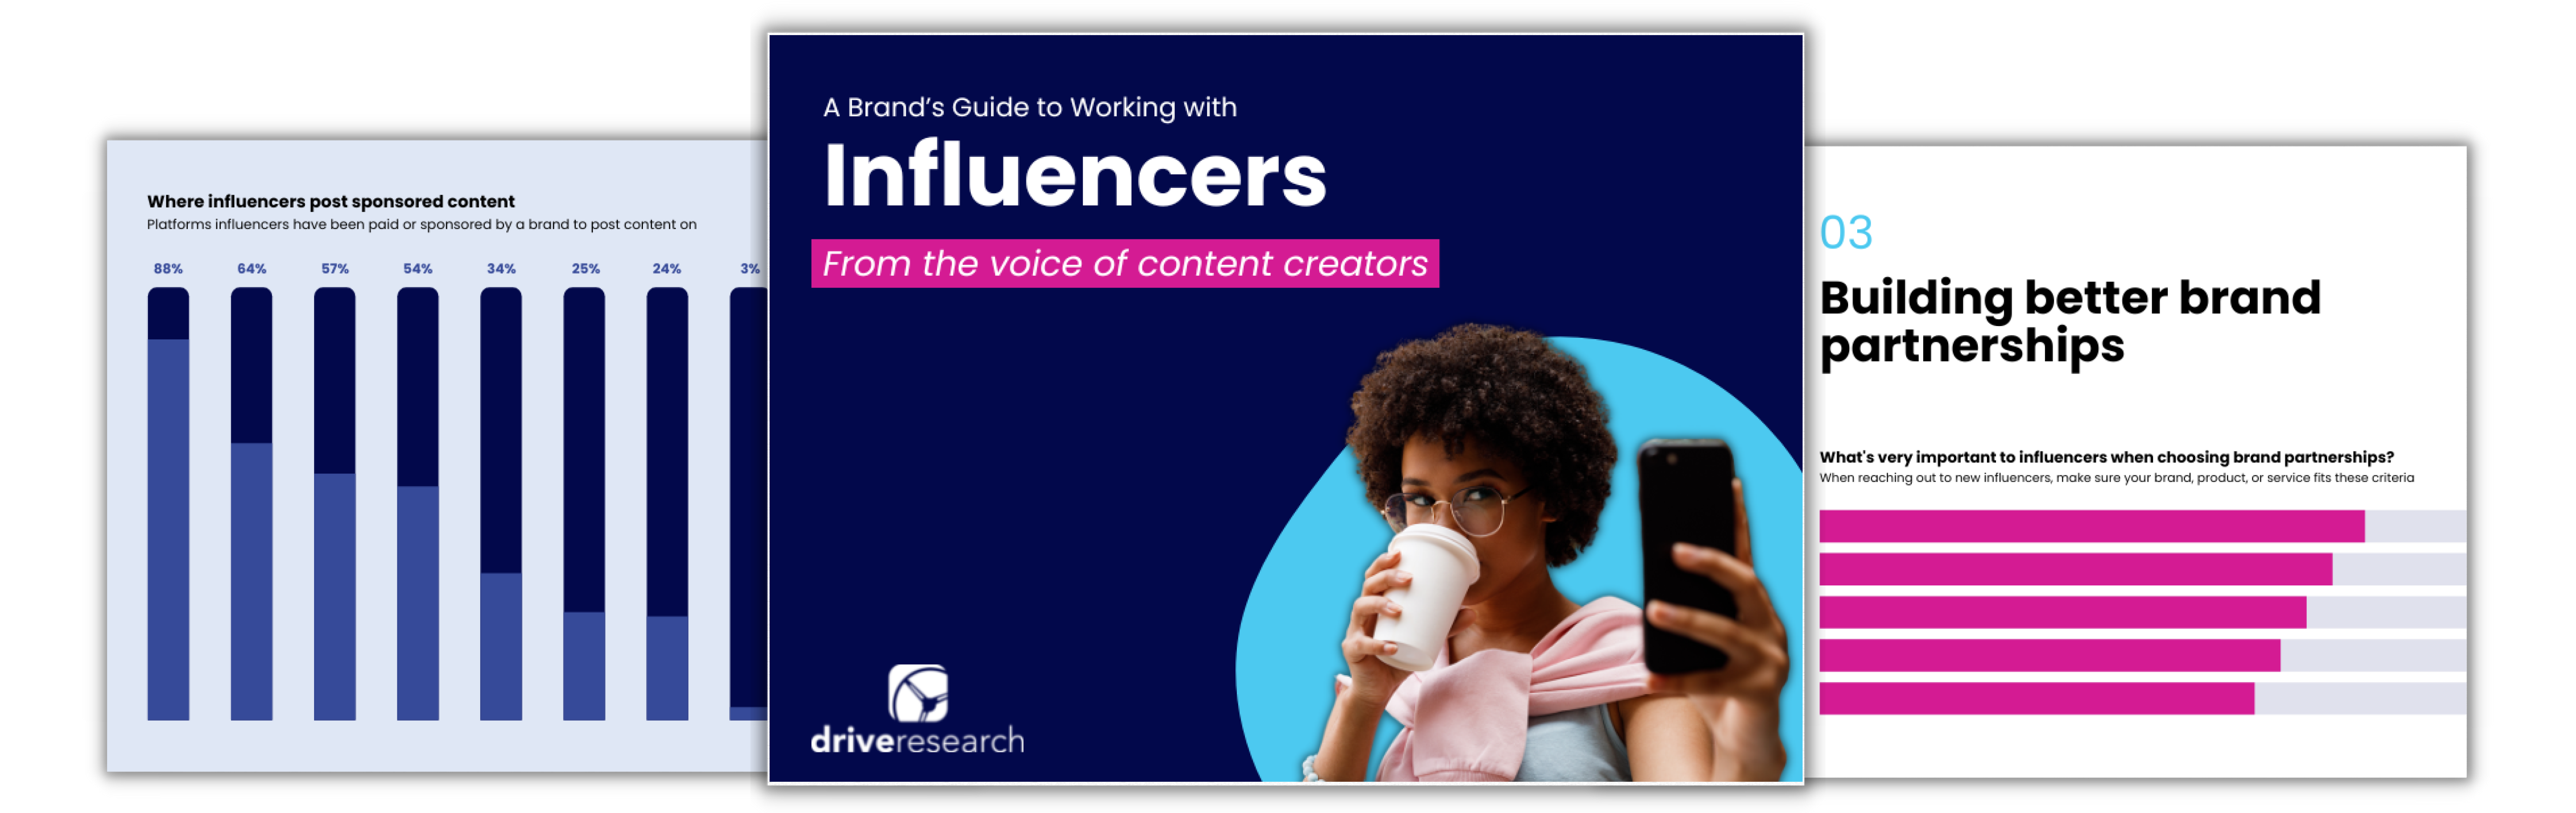 drive research brand's guide to working with influencers